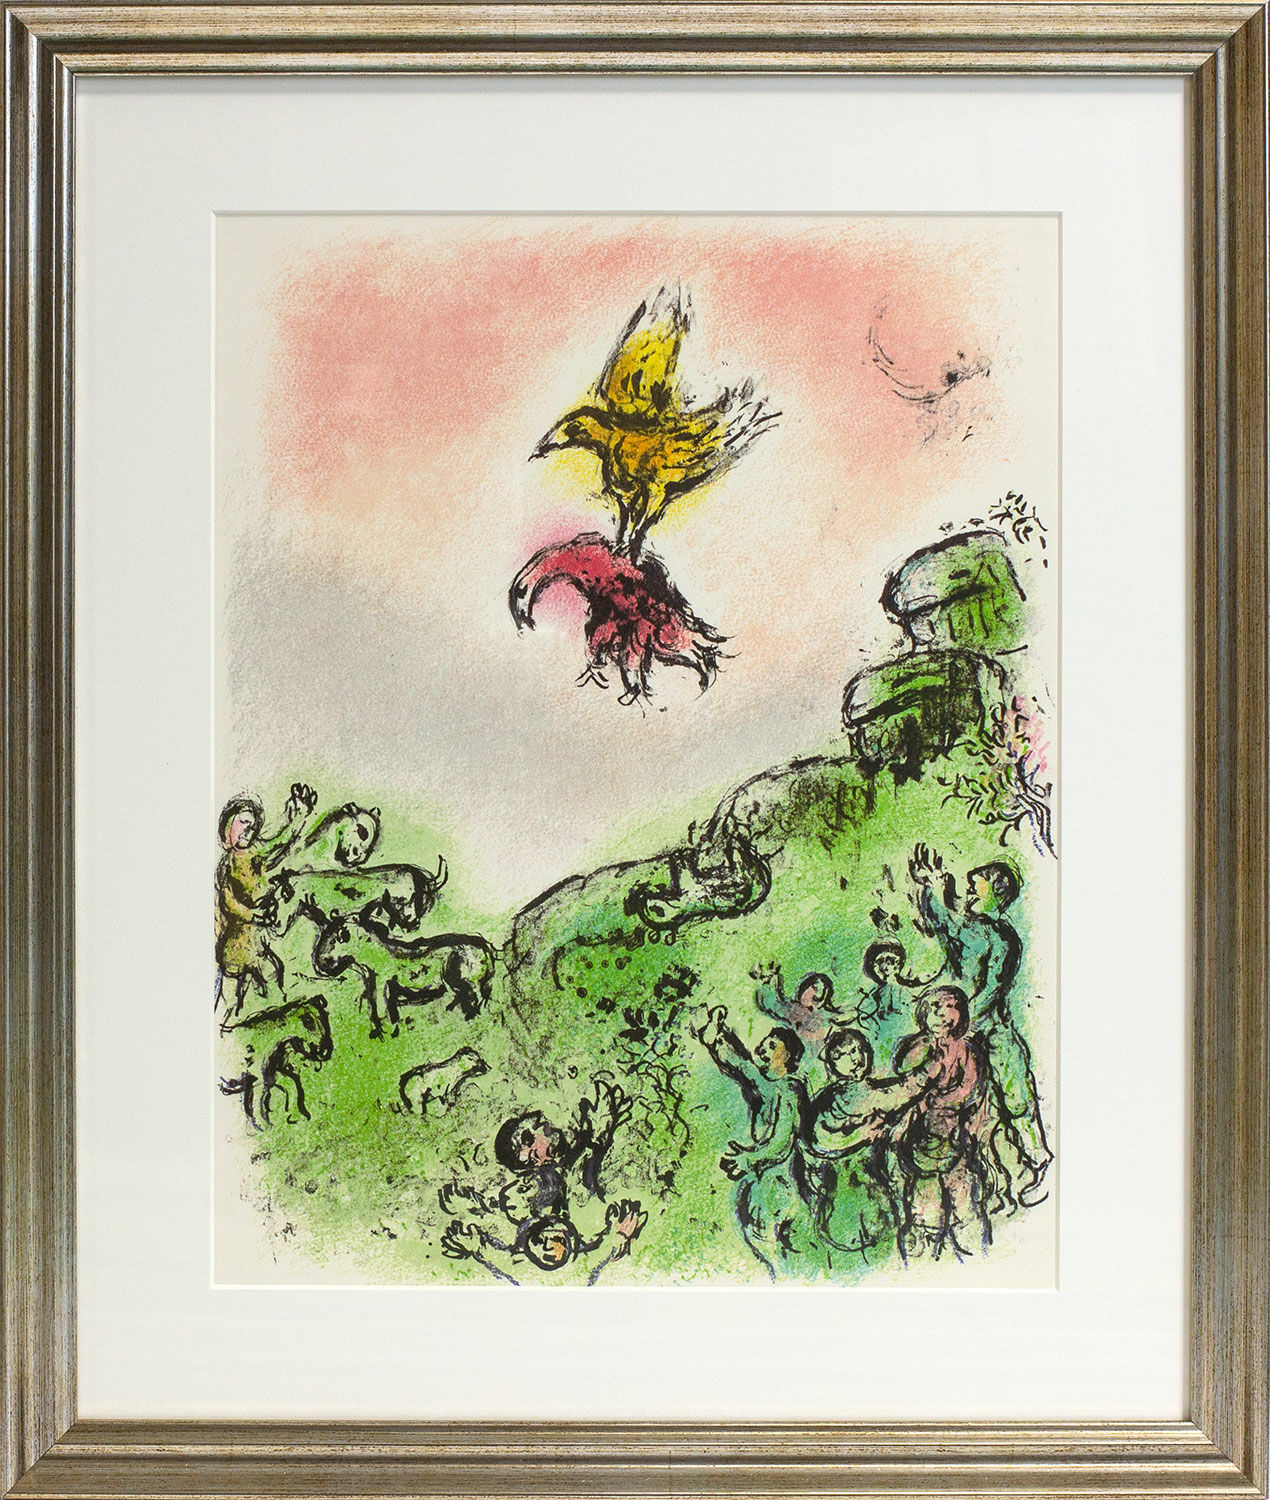 Picture "The Odyssey - The Portent, the Hawk and the Dove" (1989), framed by Marc Chagall